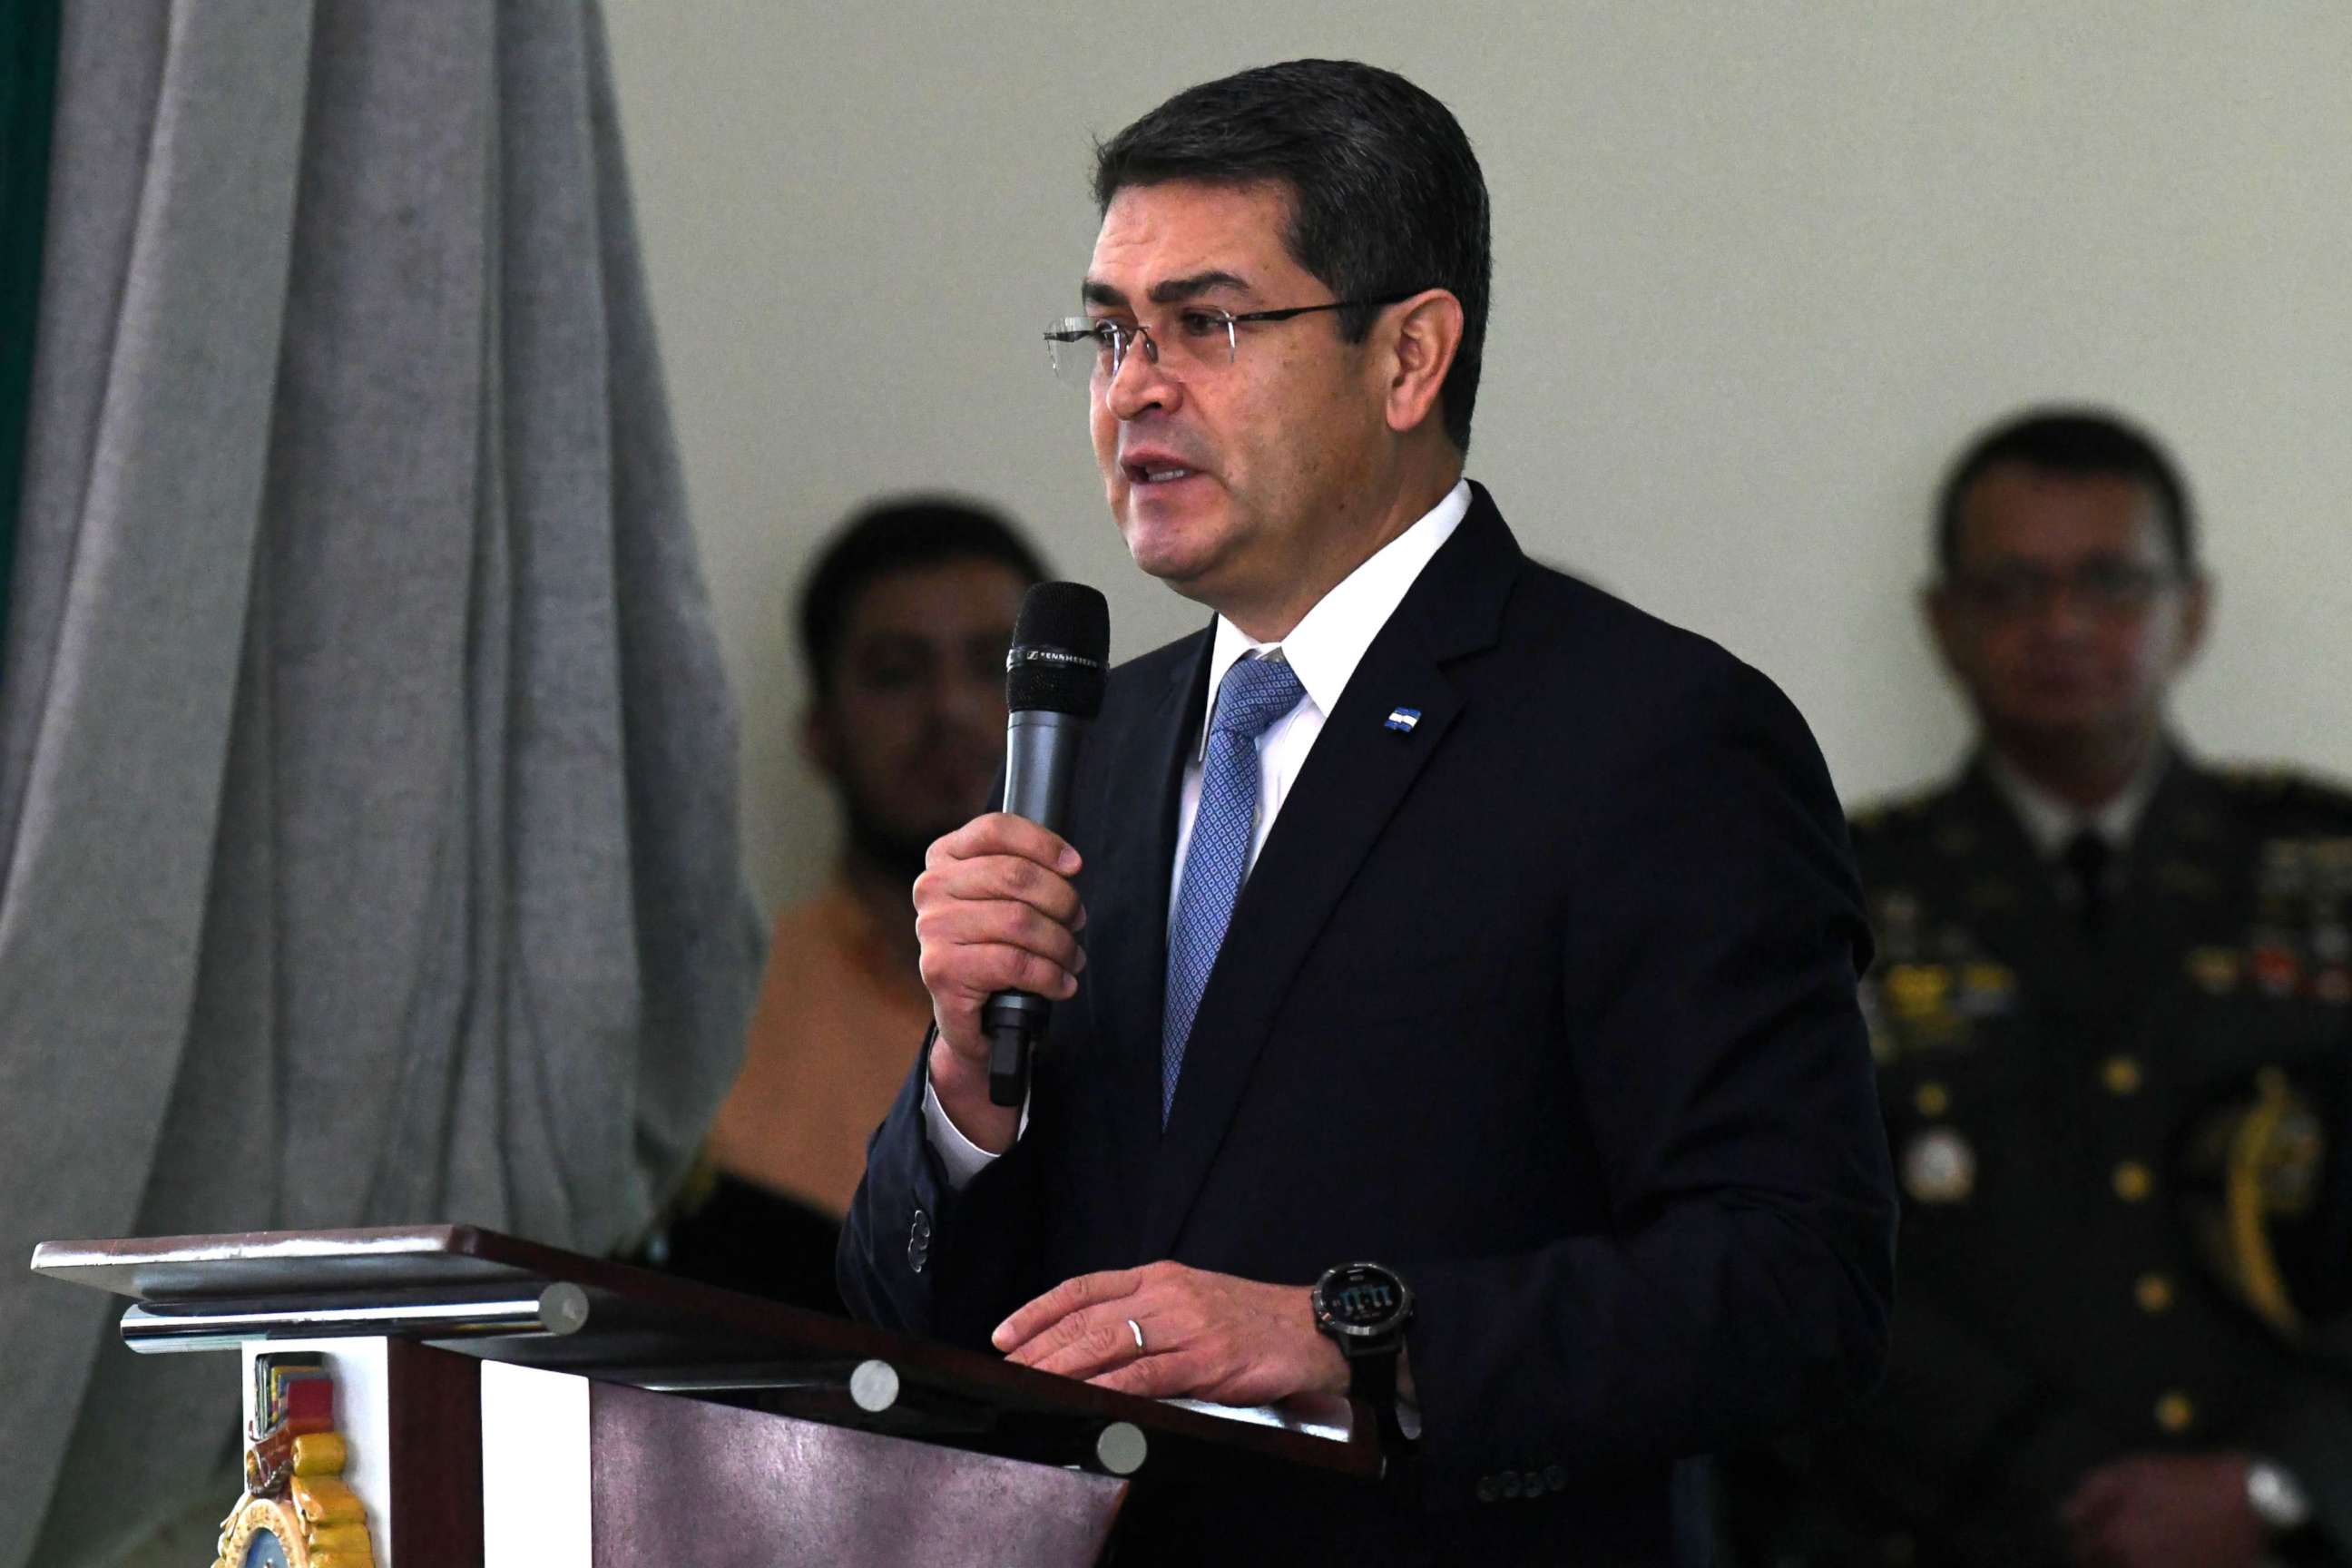 PHOTO: A file photo shows Honduran reelected President Juan Orlando Hernandez, taken on December 21, 2017, delivering a speech during the Honduran Armed Forces' command handover ceremony in Tegucigalpa.